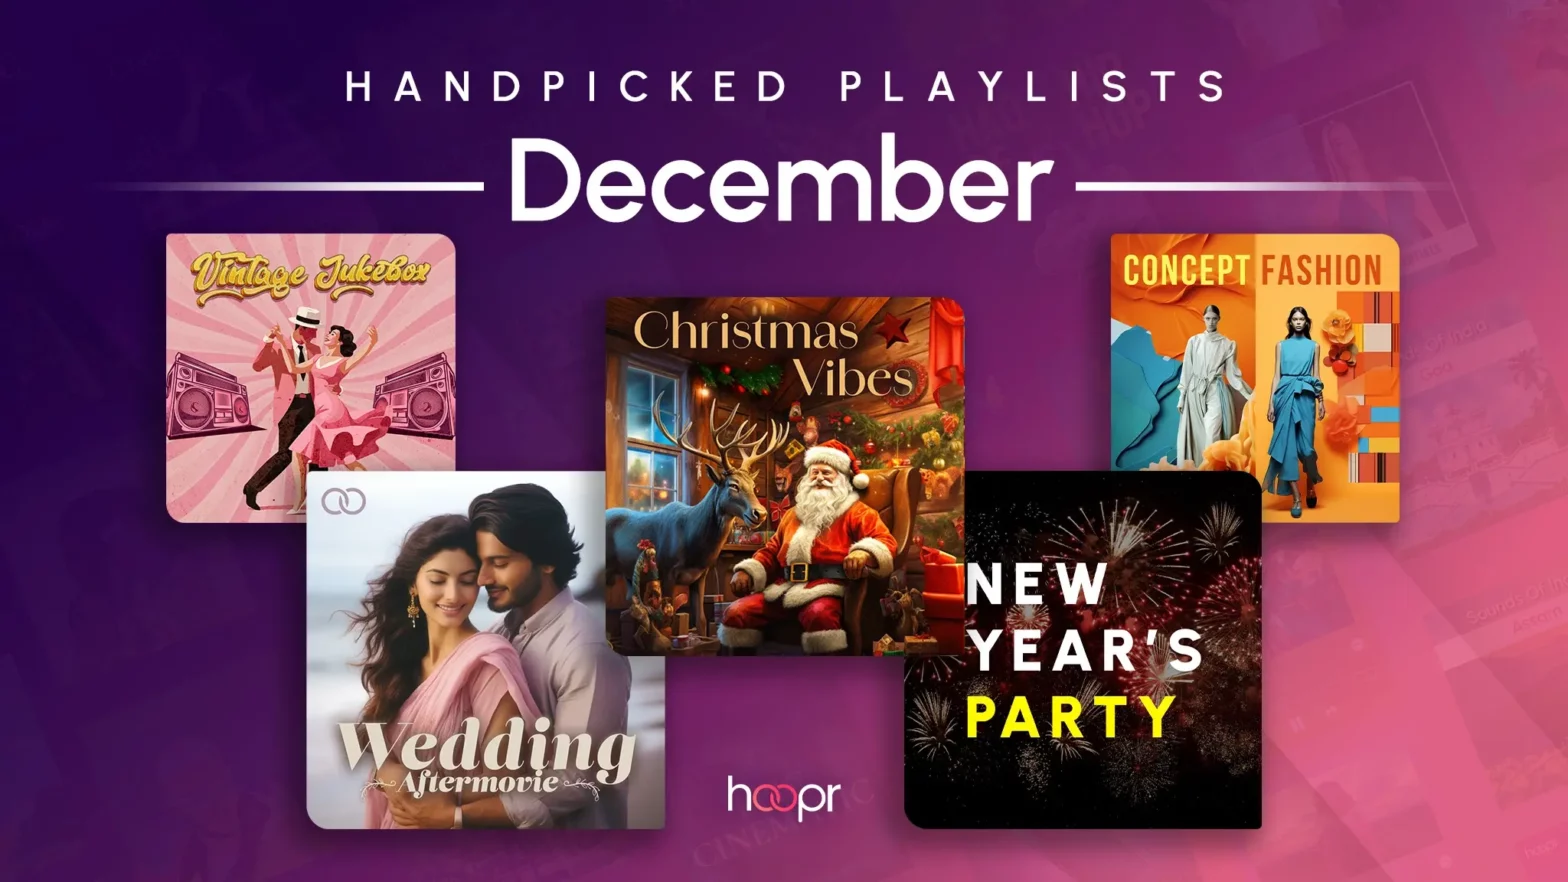 Handpicked Playlists of the Month: December